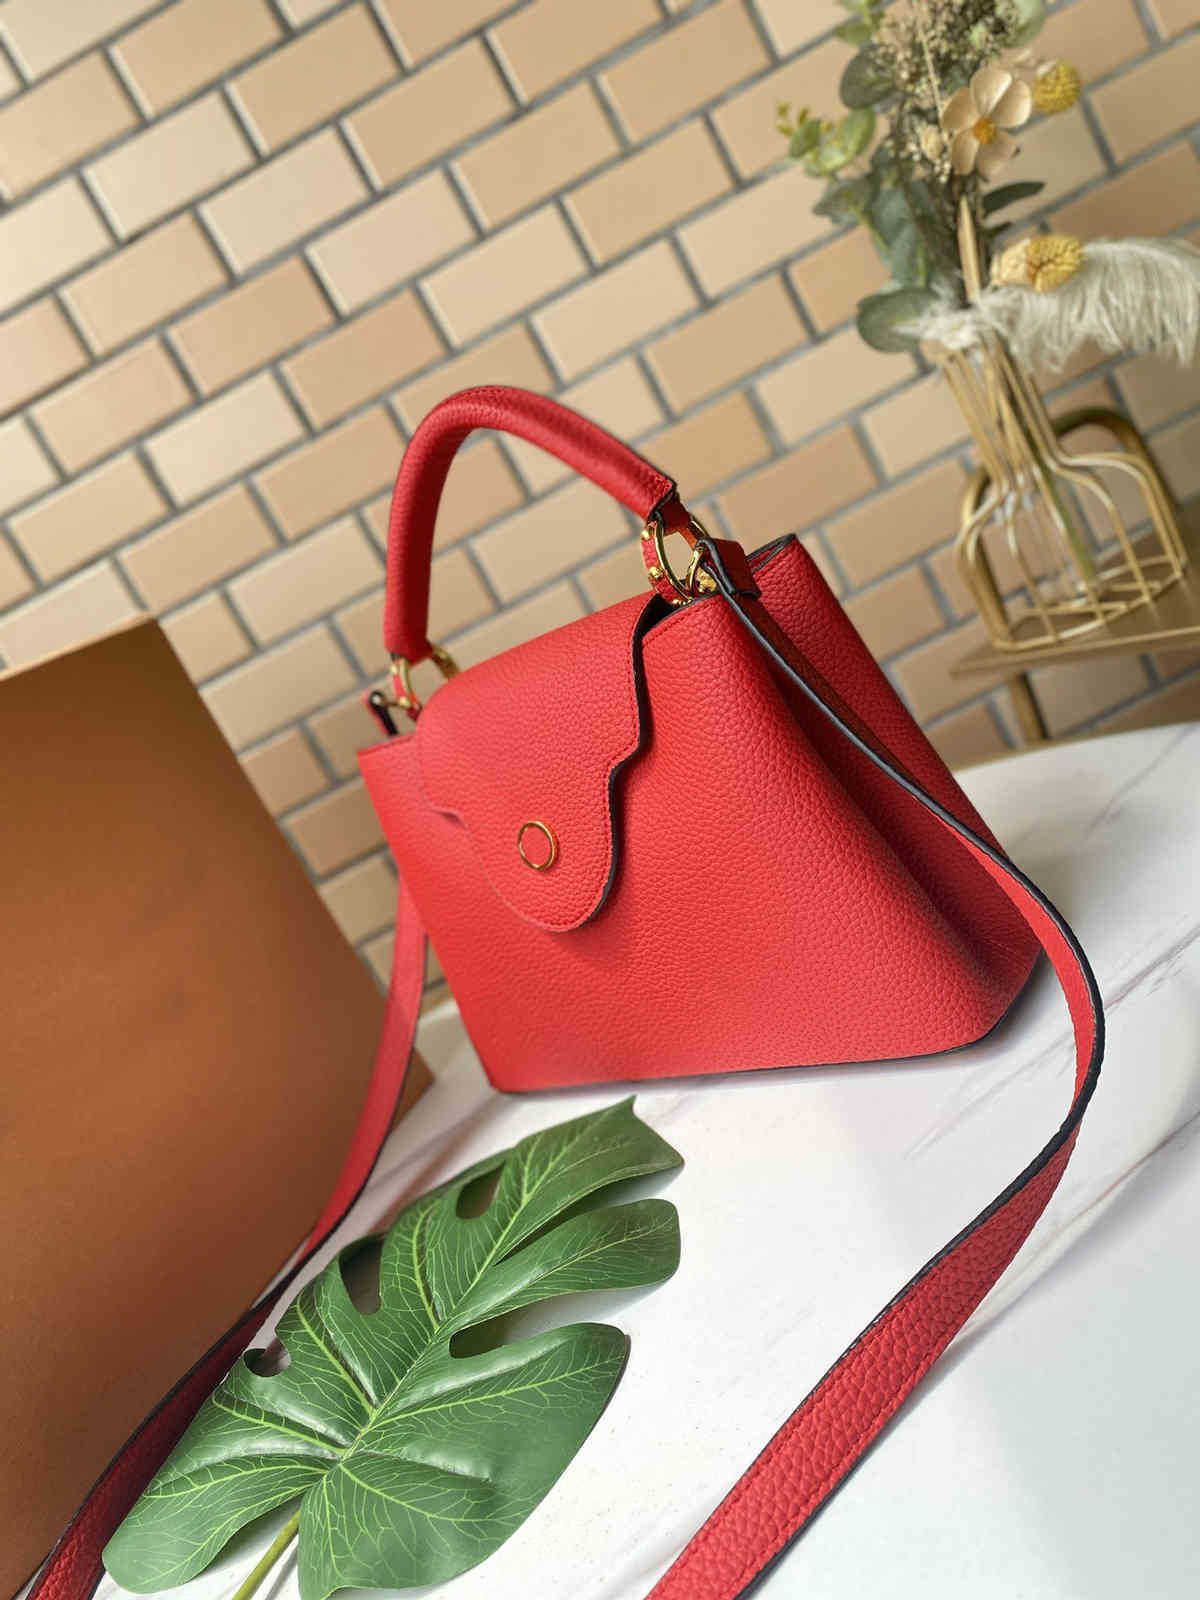 

Bags Capucines Shopping Tote Designer Messenger Handbags Purses Luxury M48870 Shoulder Cosmetic Pockets Totes Qphcf, Red